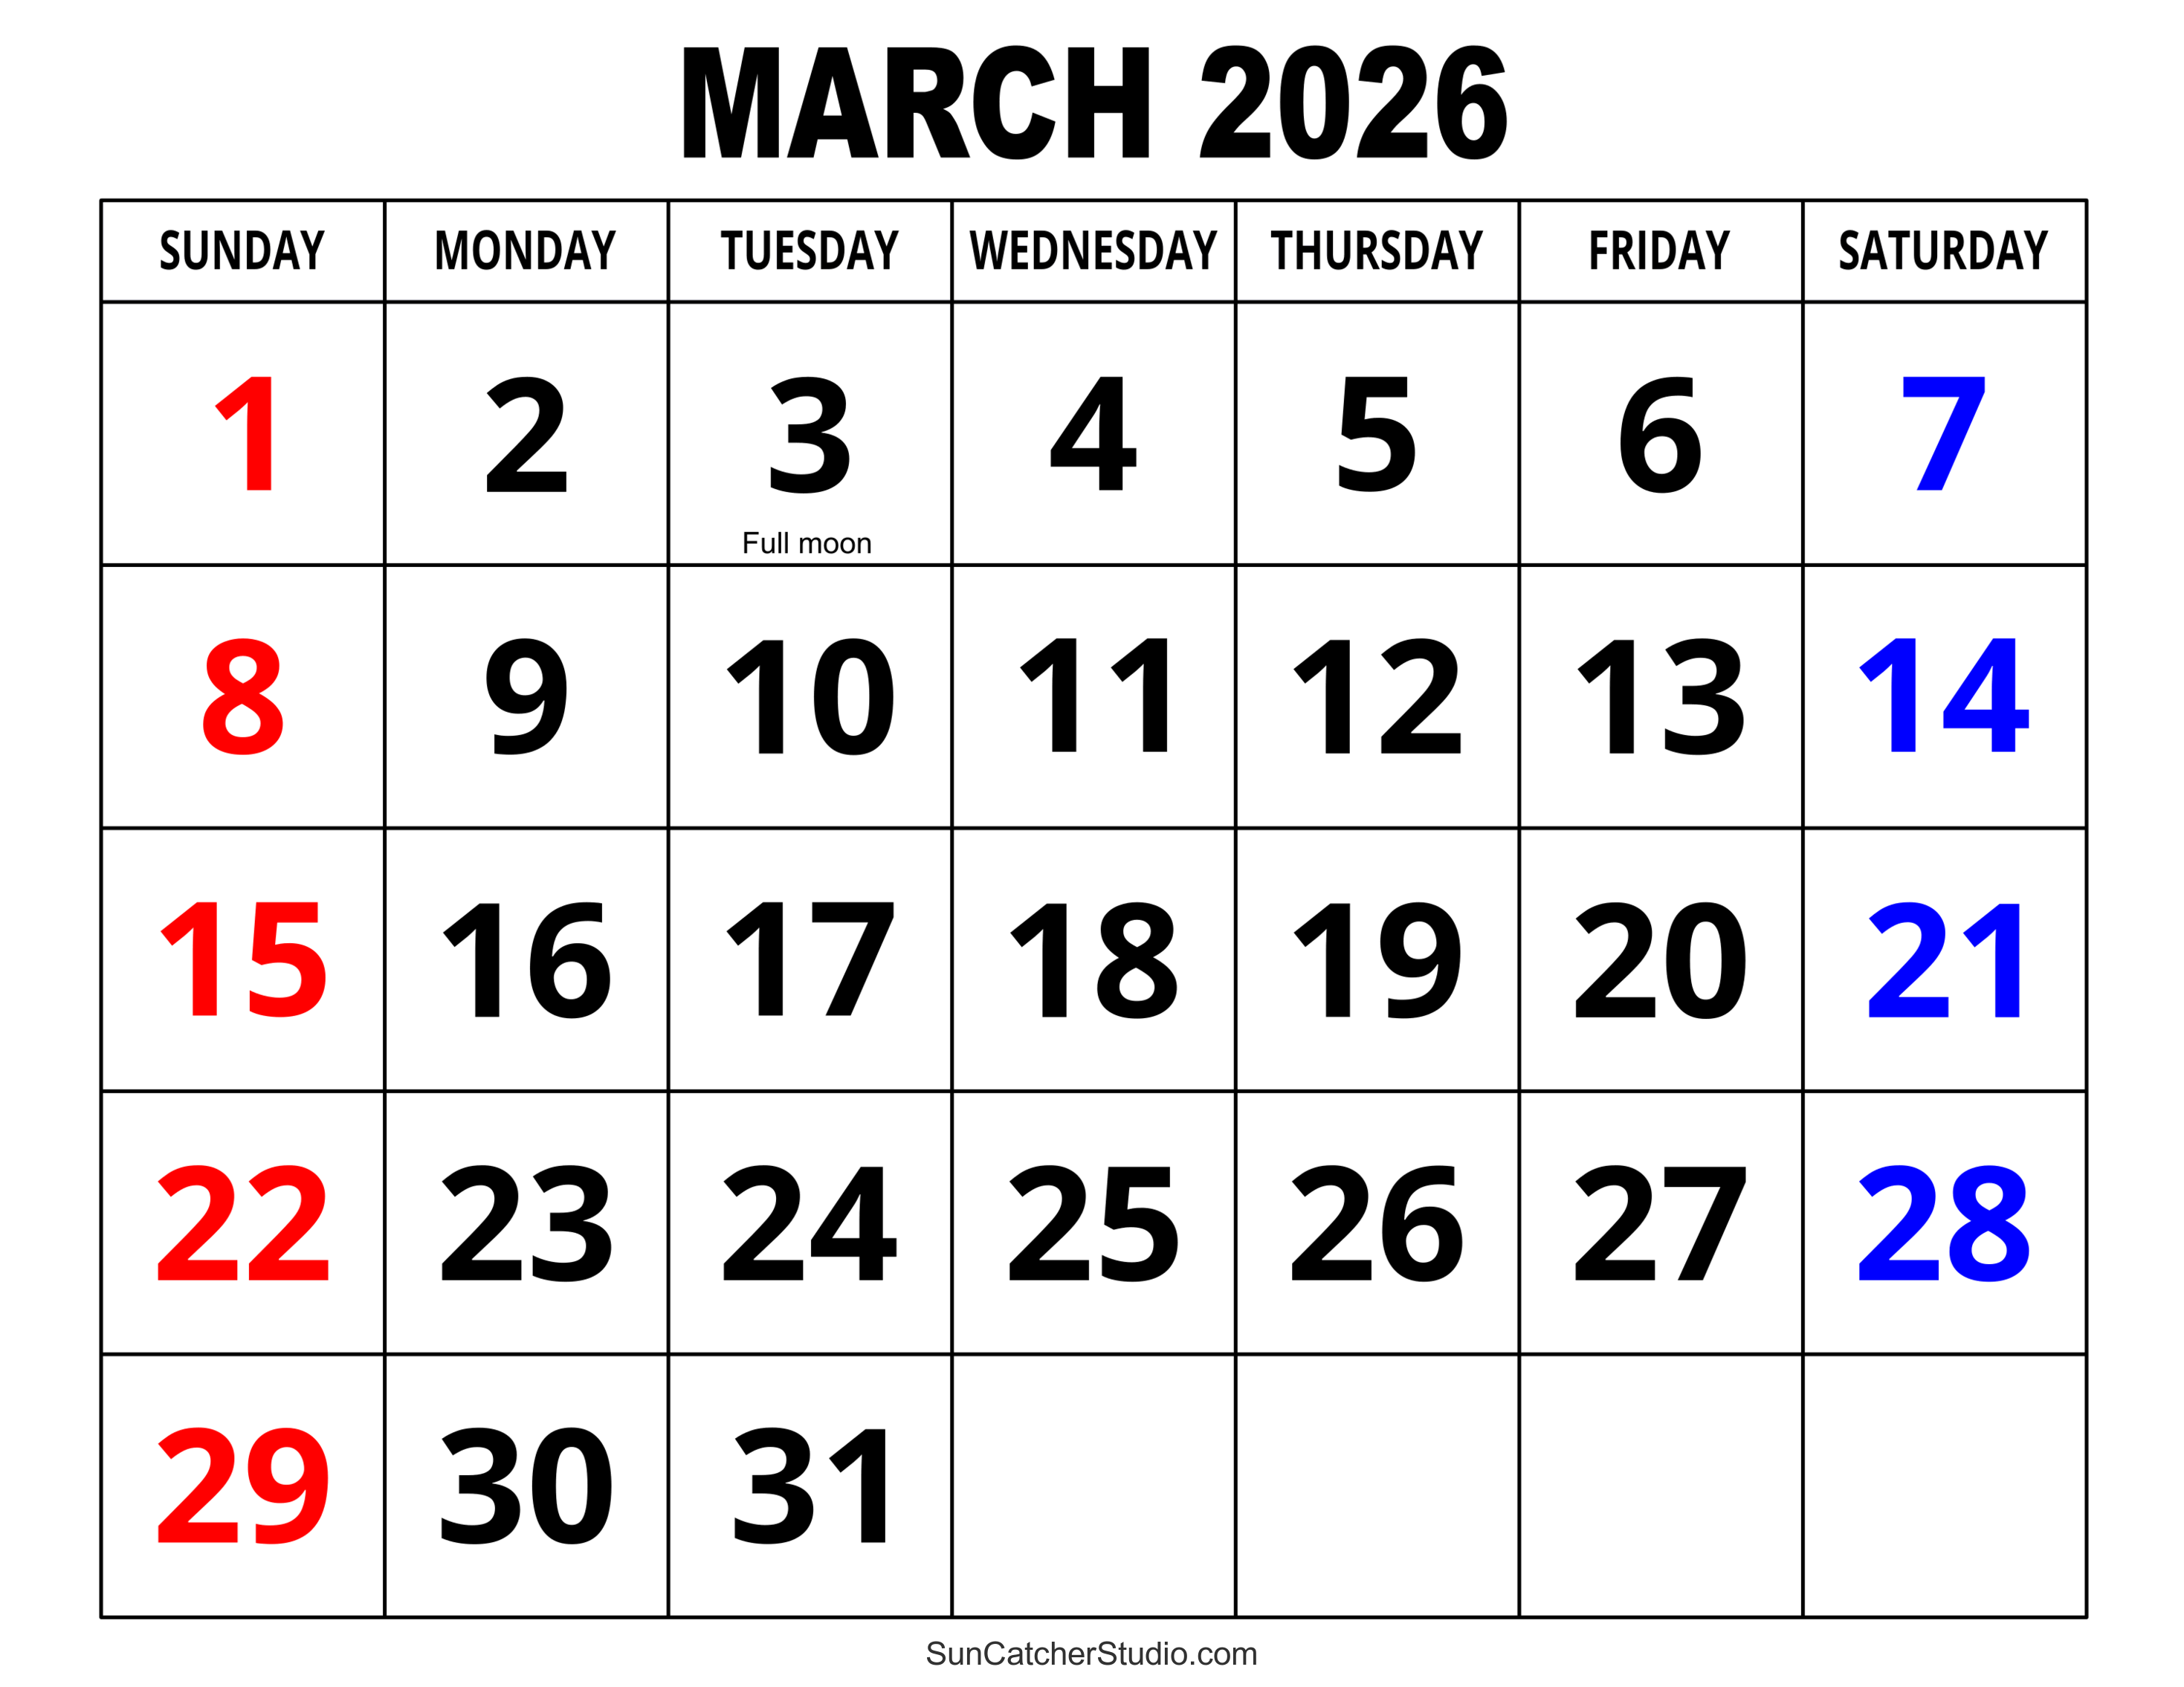 March 2026 Calendar (Free Printable) DIY Projects, Patterns